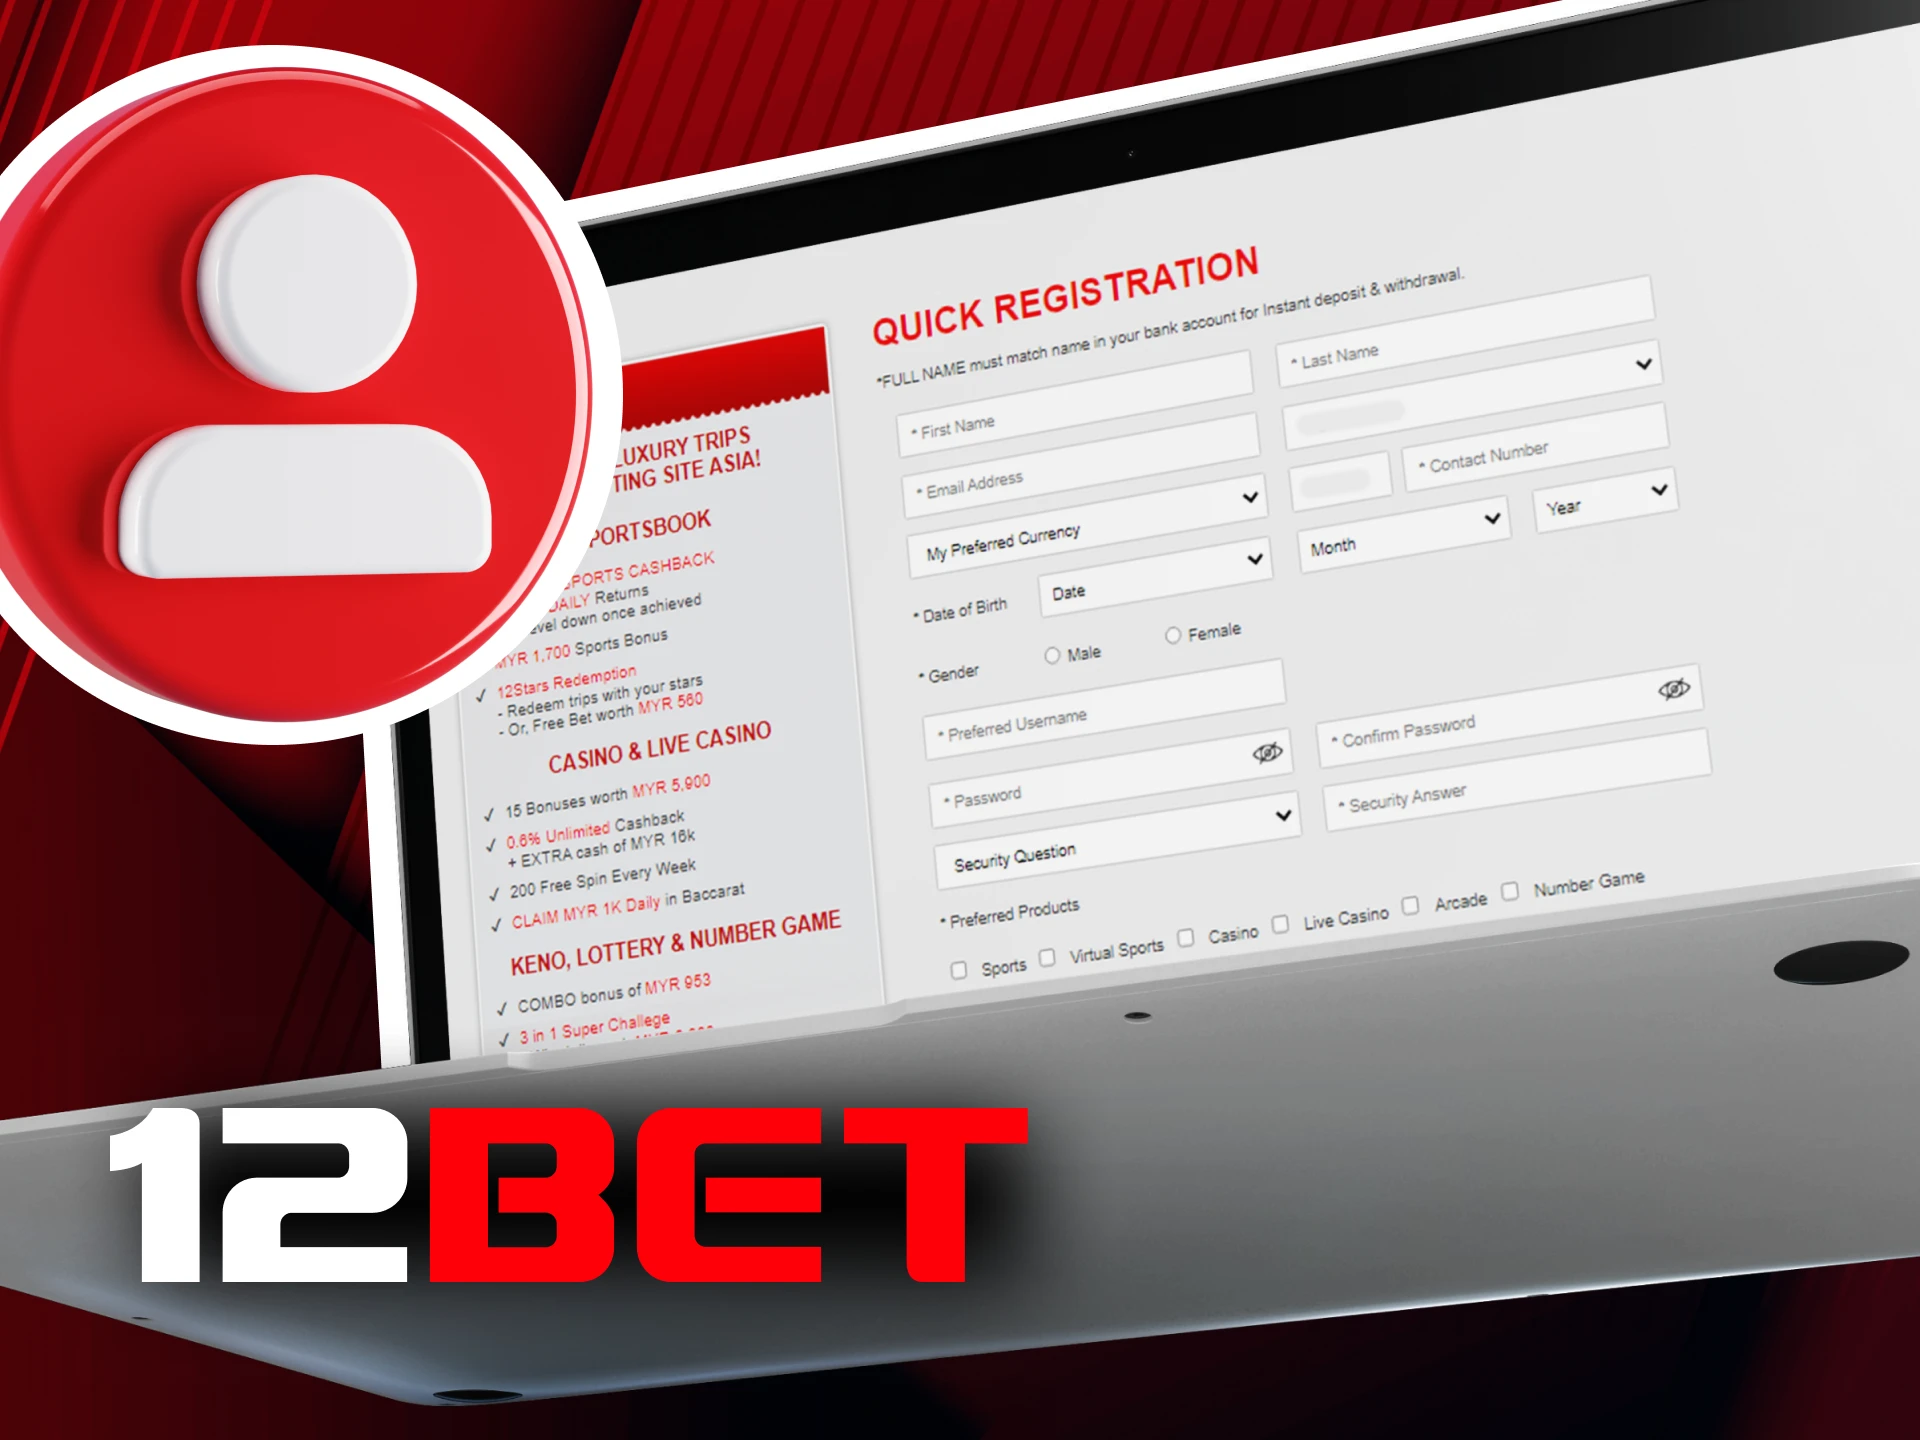 How can I create a new account at 12bet online casino.